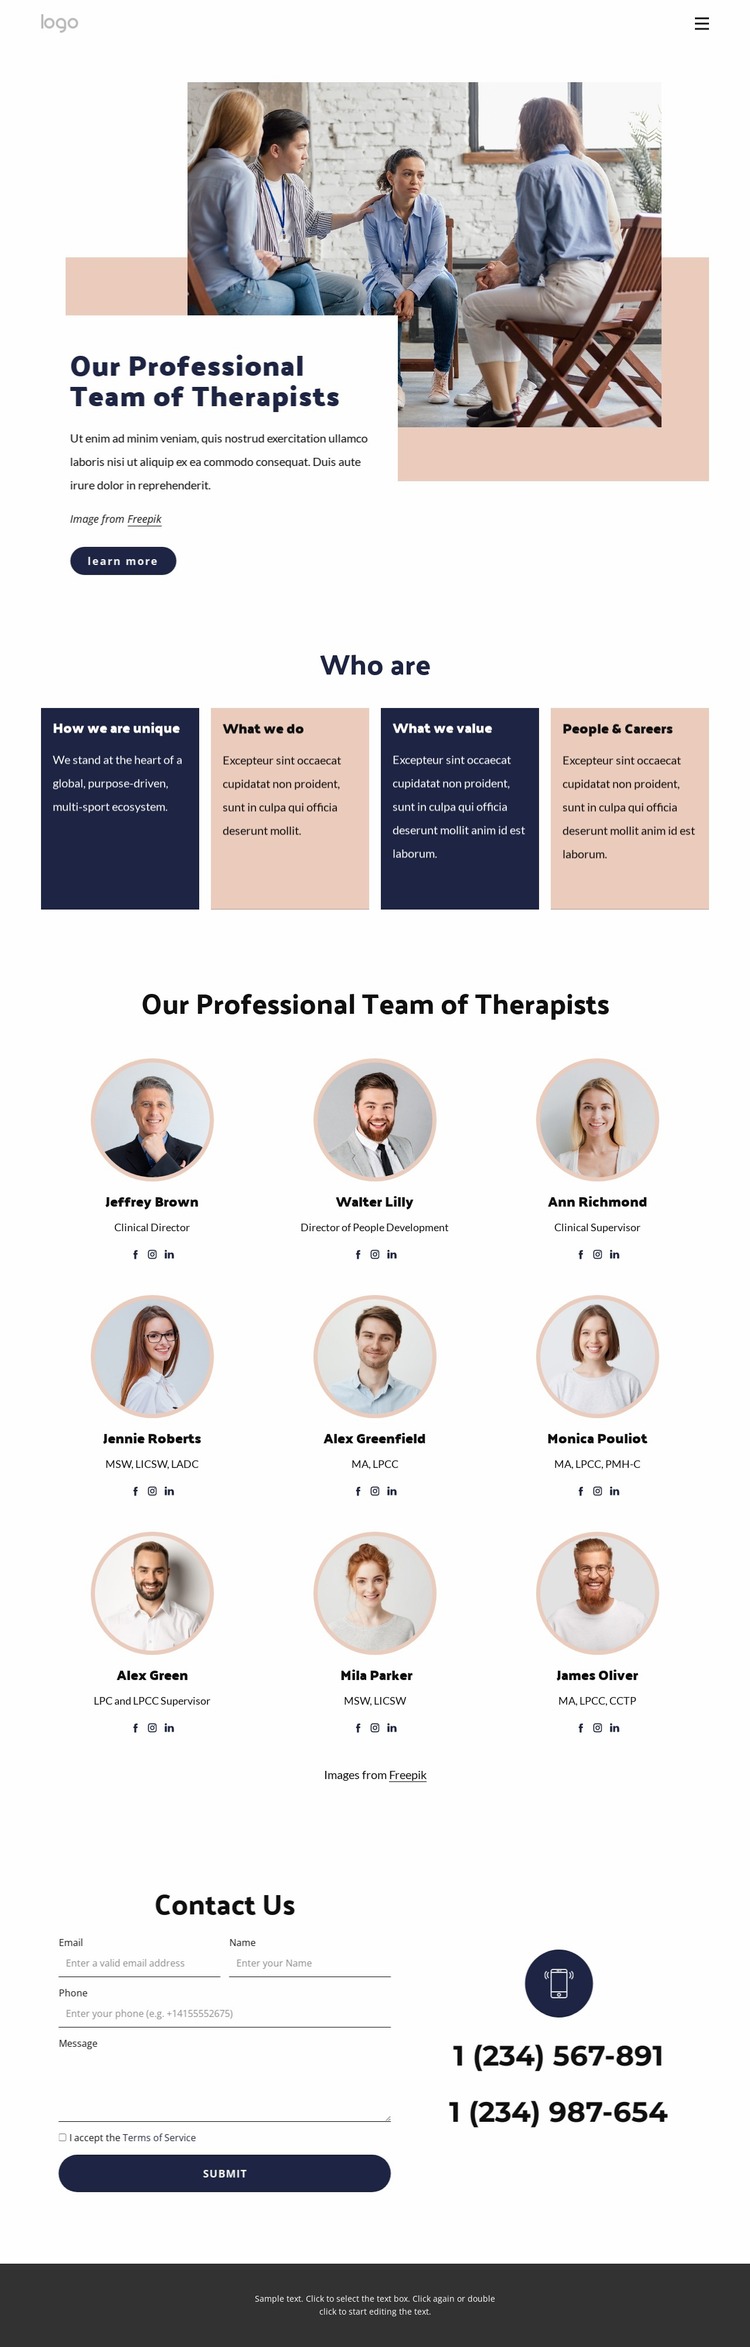 Our professional team of therapists Website Mockup